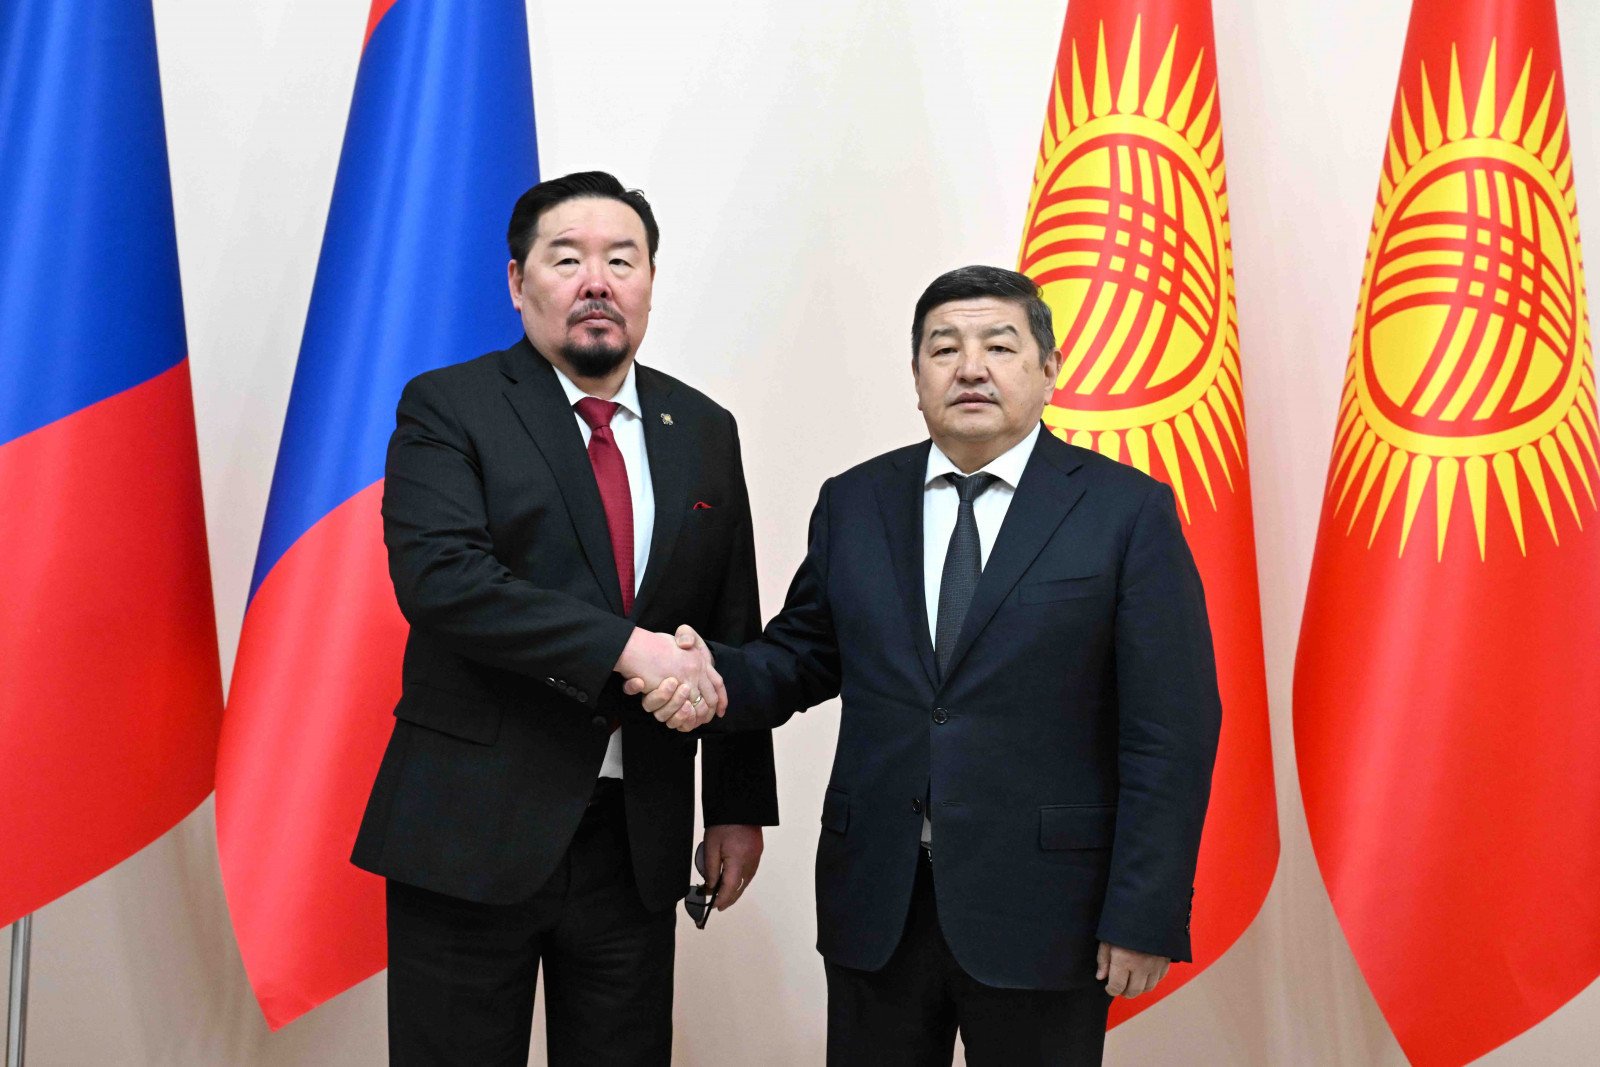 Kyrgyzstan aims to utilize Mongolia's textile industry expertise